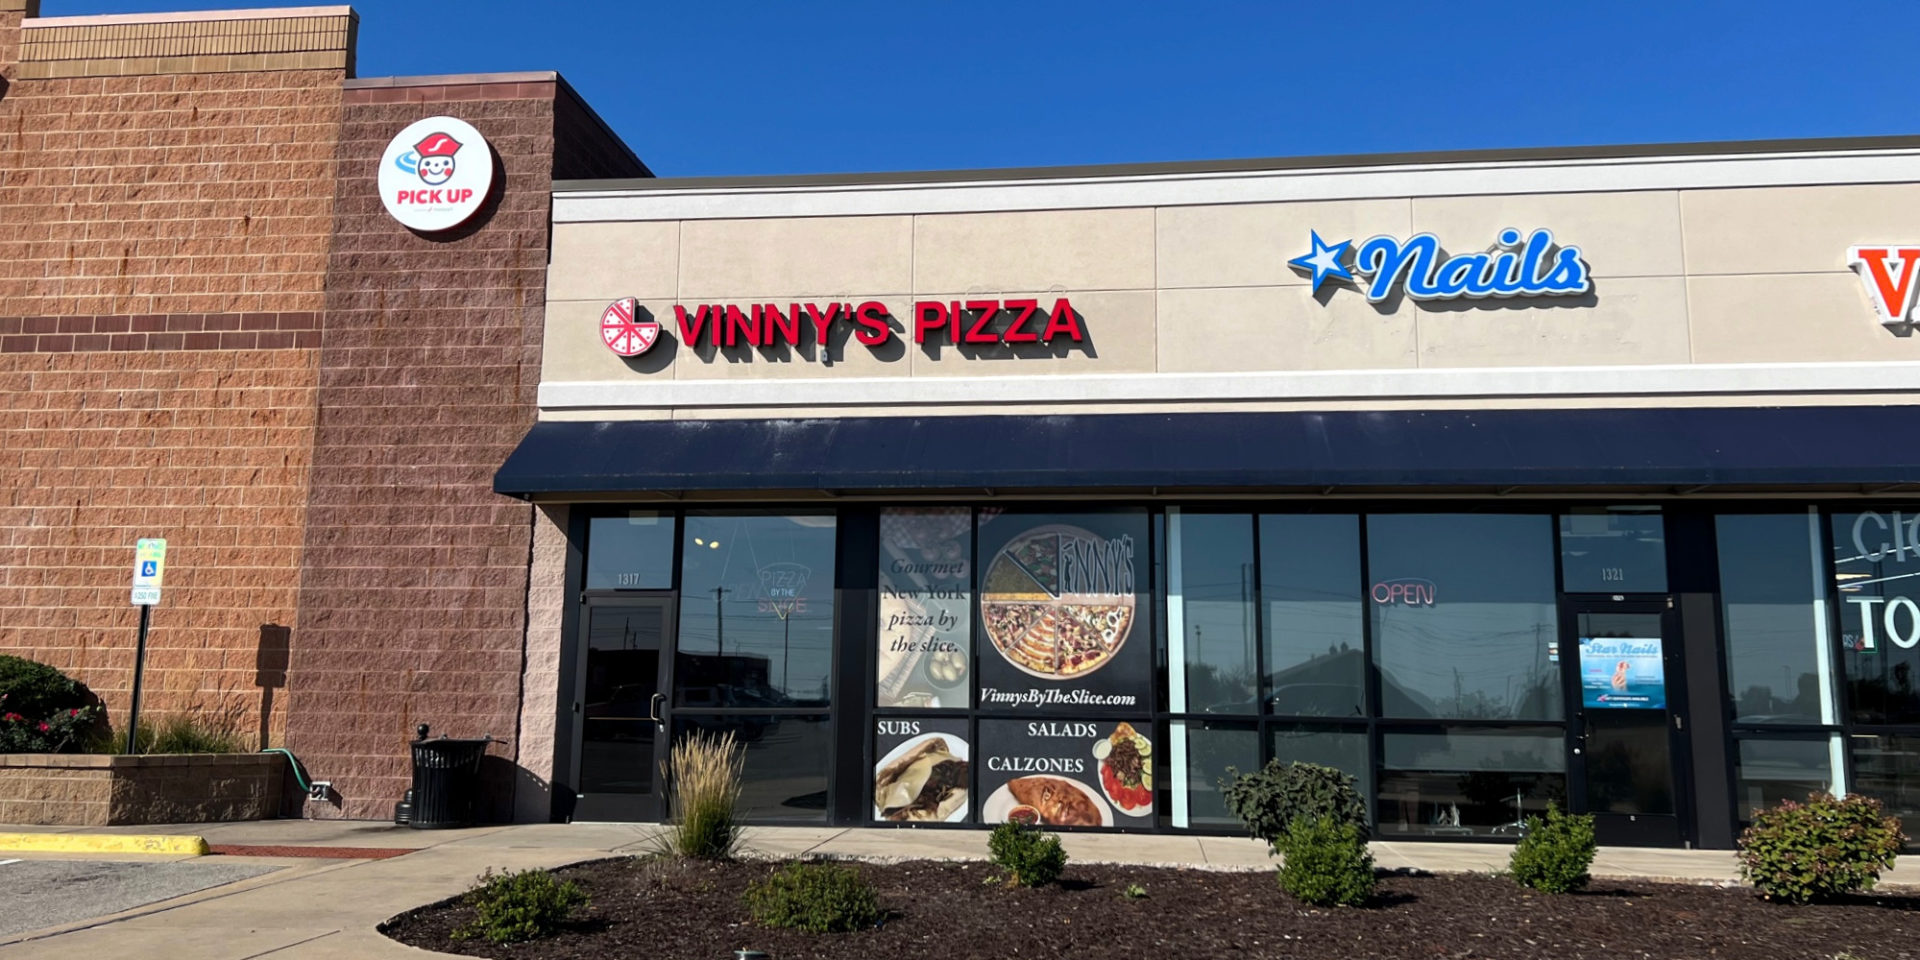 The exterior of Vinny's Pizza of Savoy, the new location for Vinny's Pizza beside Schucks grocery in Savoy